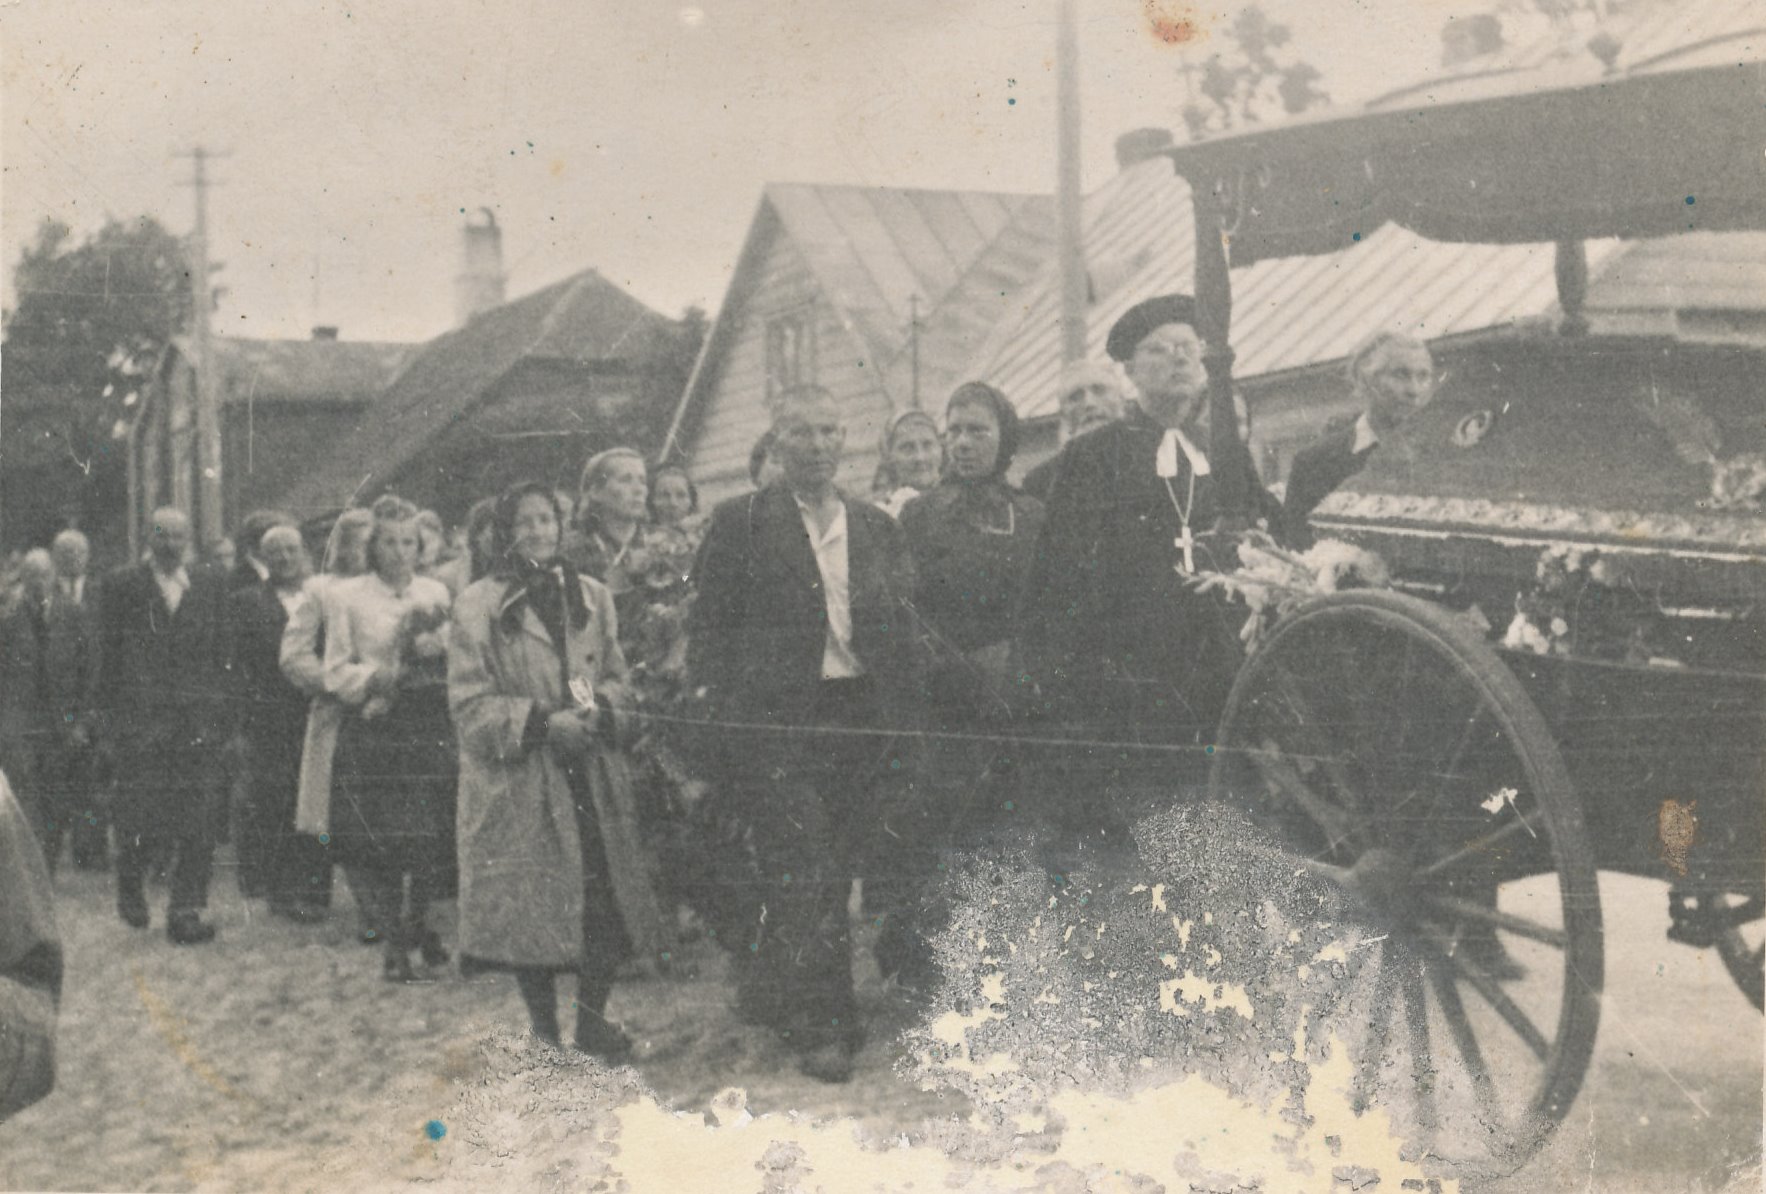 Photo. A funeral trip with a cross on a funeral vanna in 1940s at the corner of Kreutzwald and Liiva Street